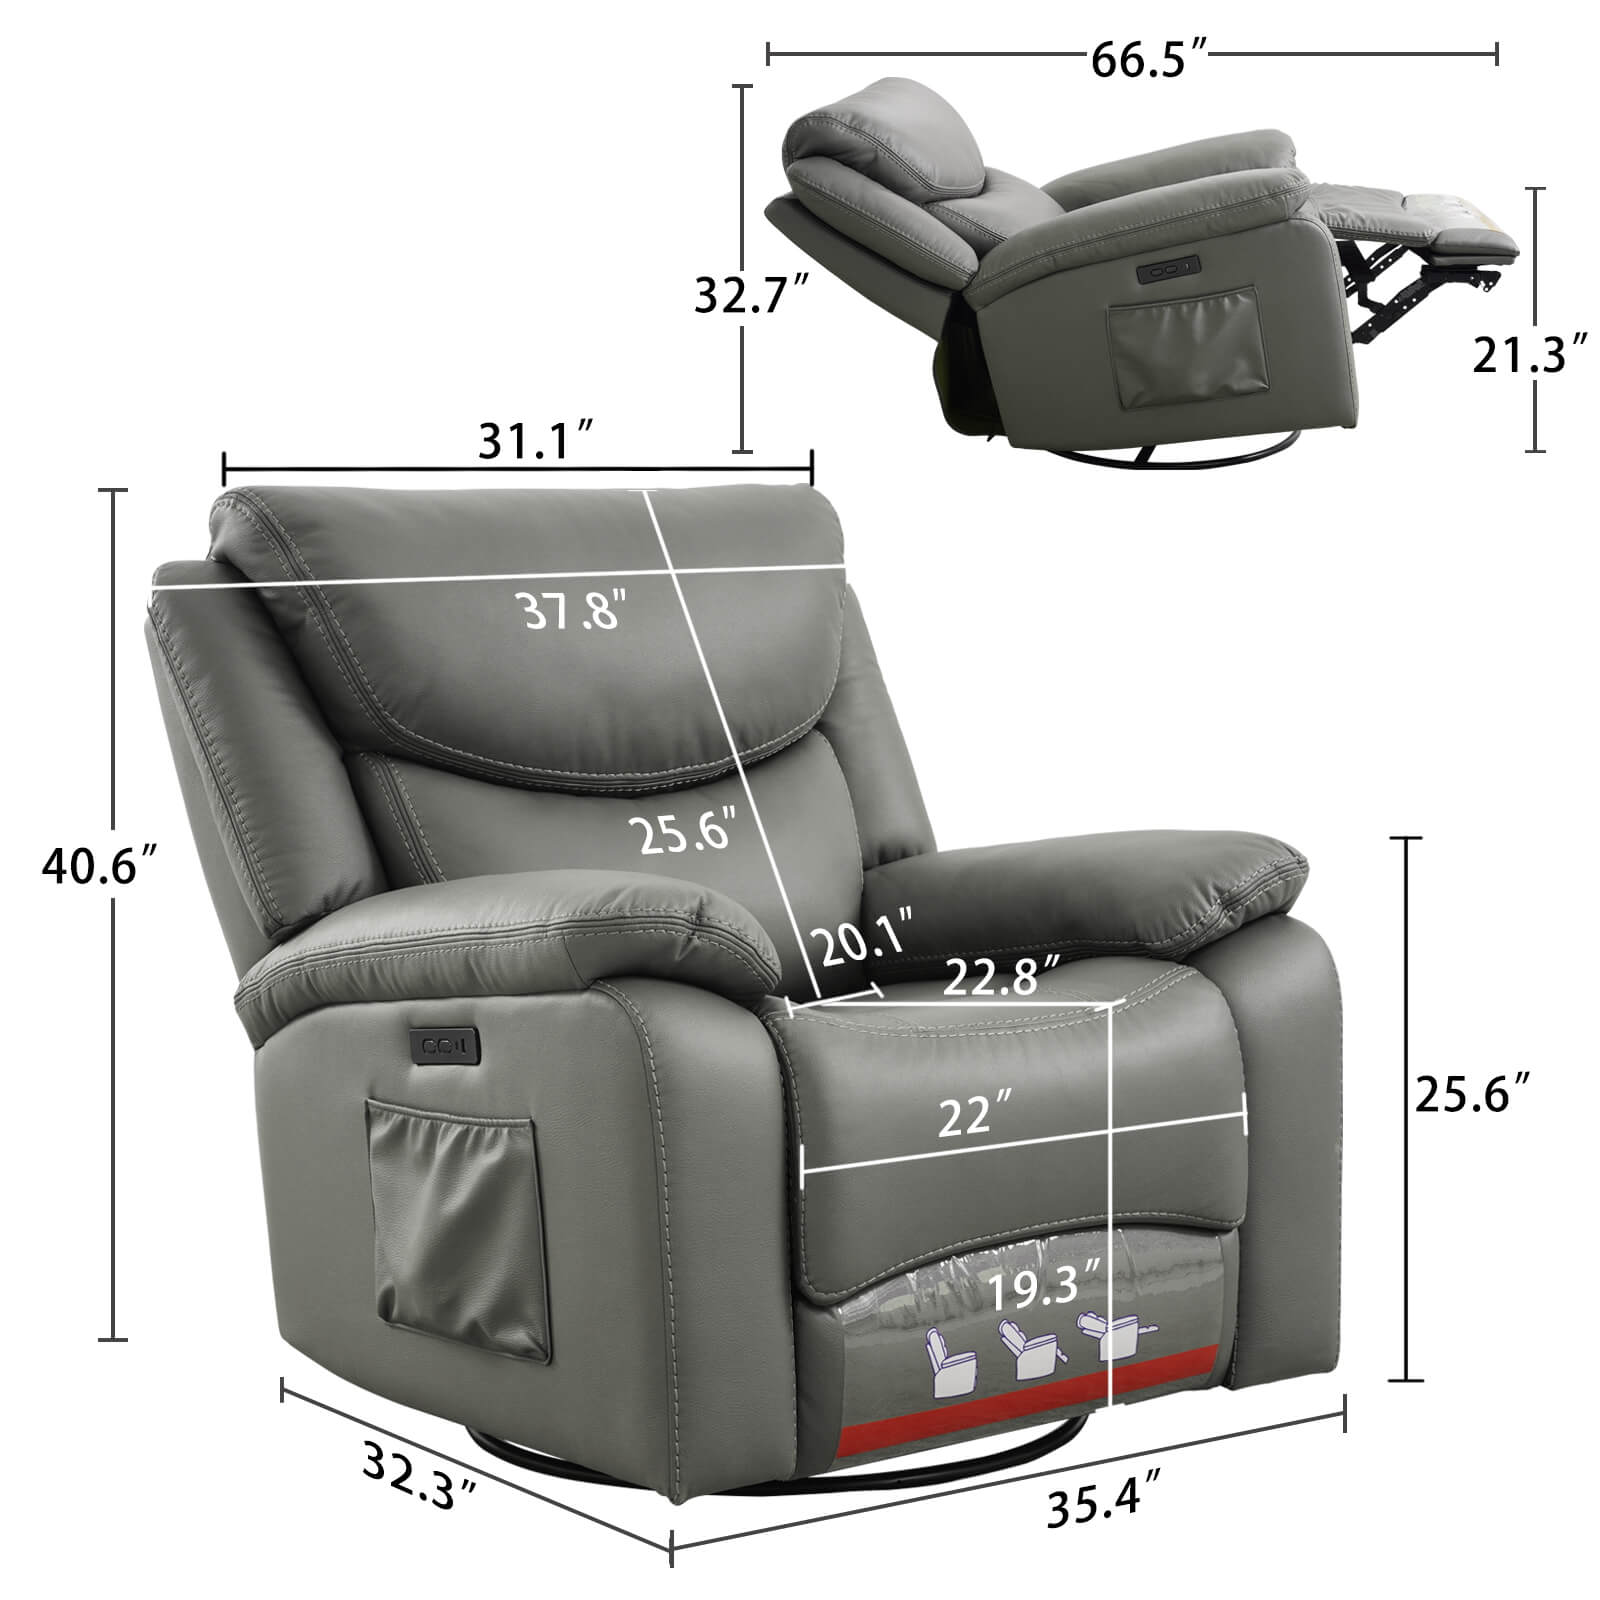 Soulout Swivel Glider Rocking Recliner Power Reclining Chair Size